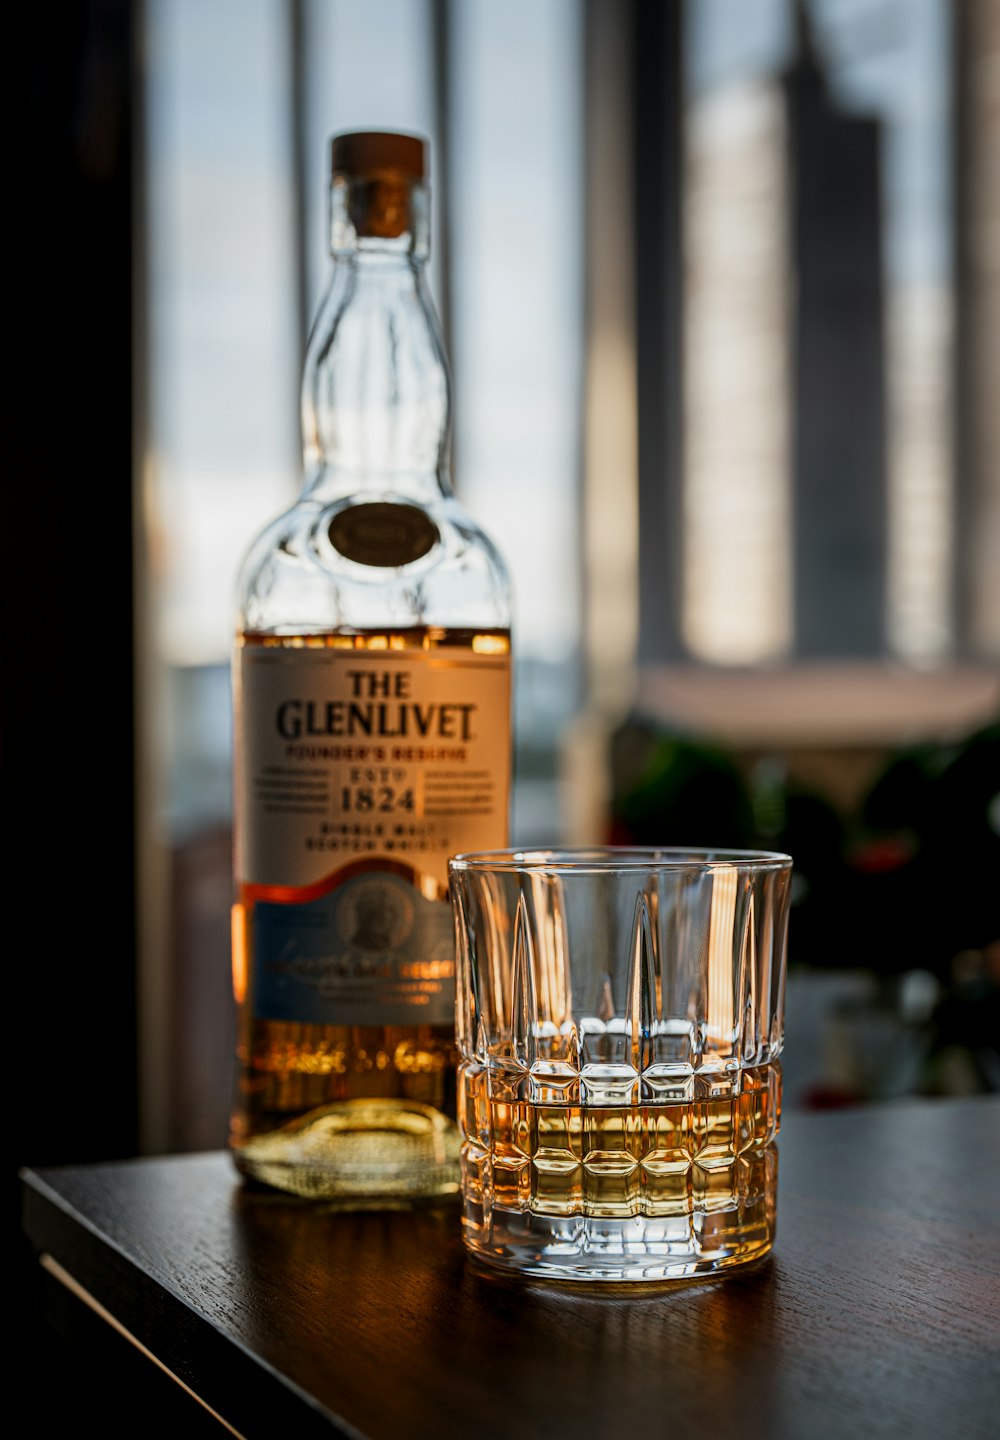 a bottle of whisky next to a glass on a table